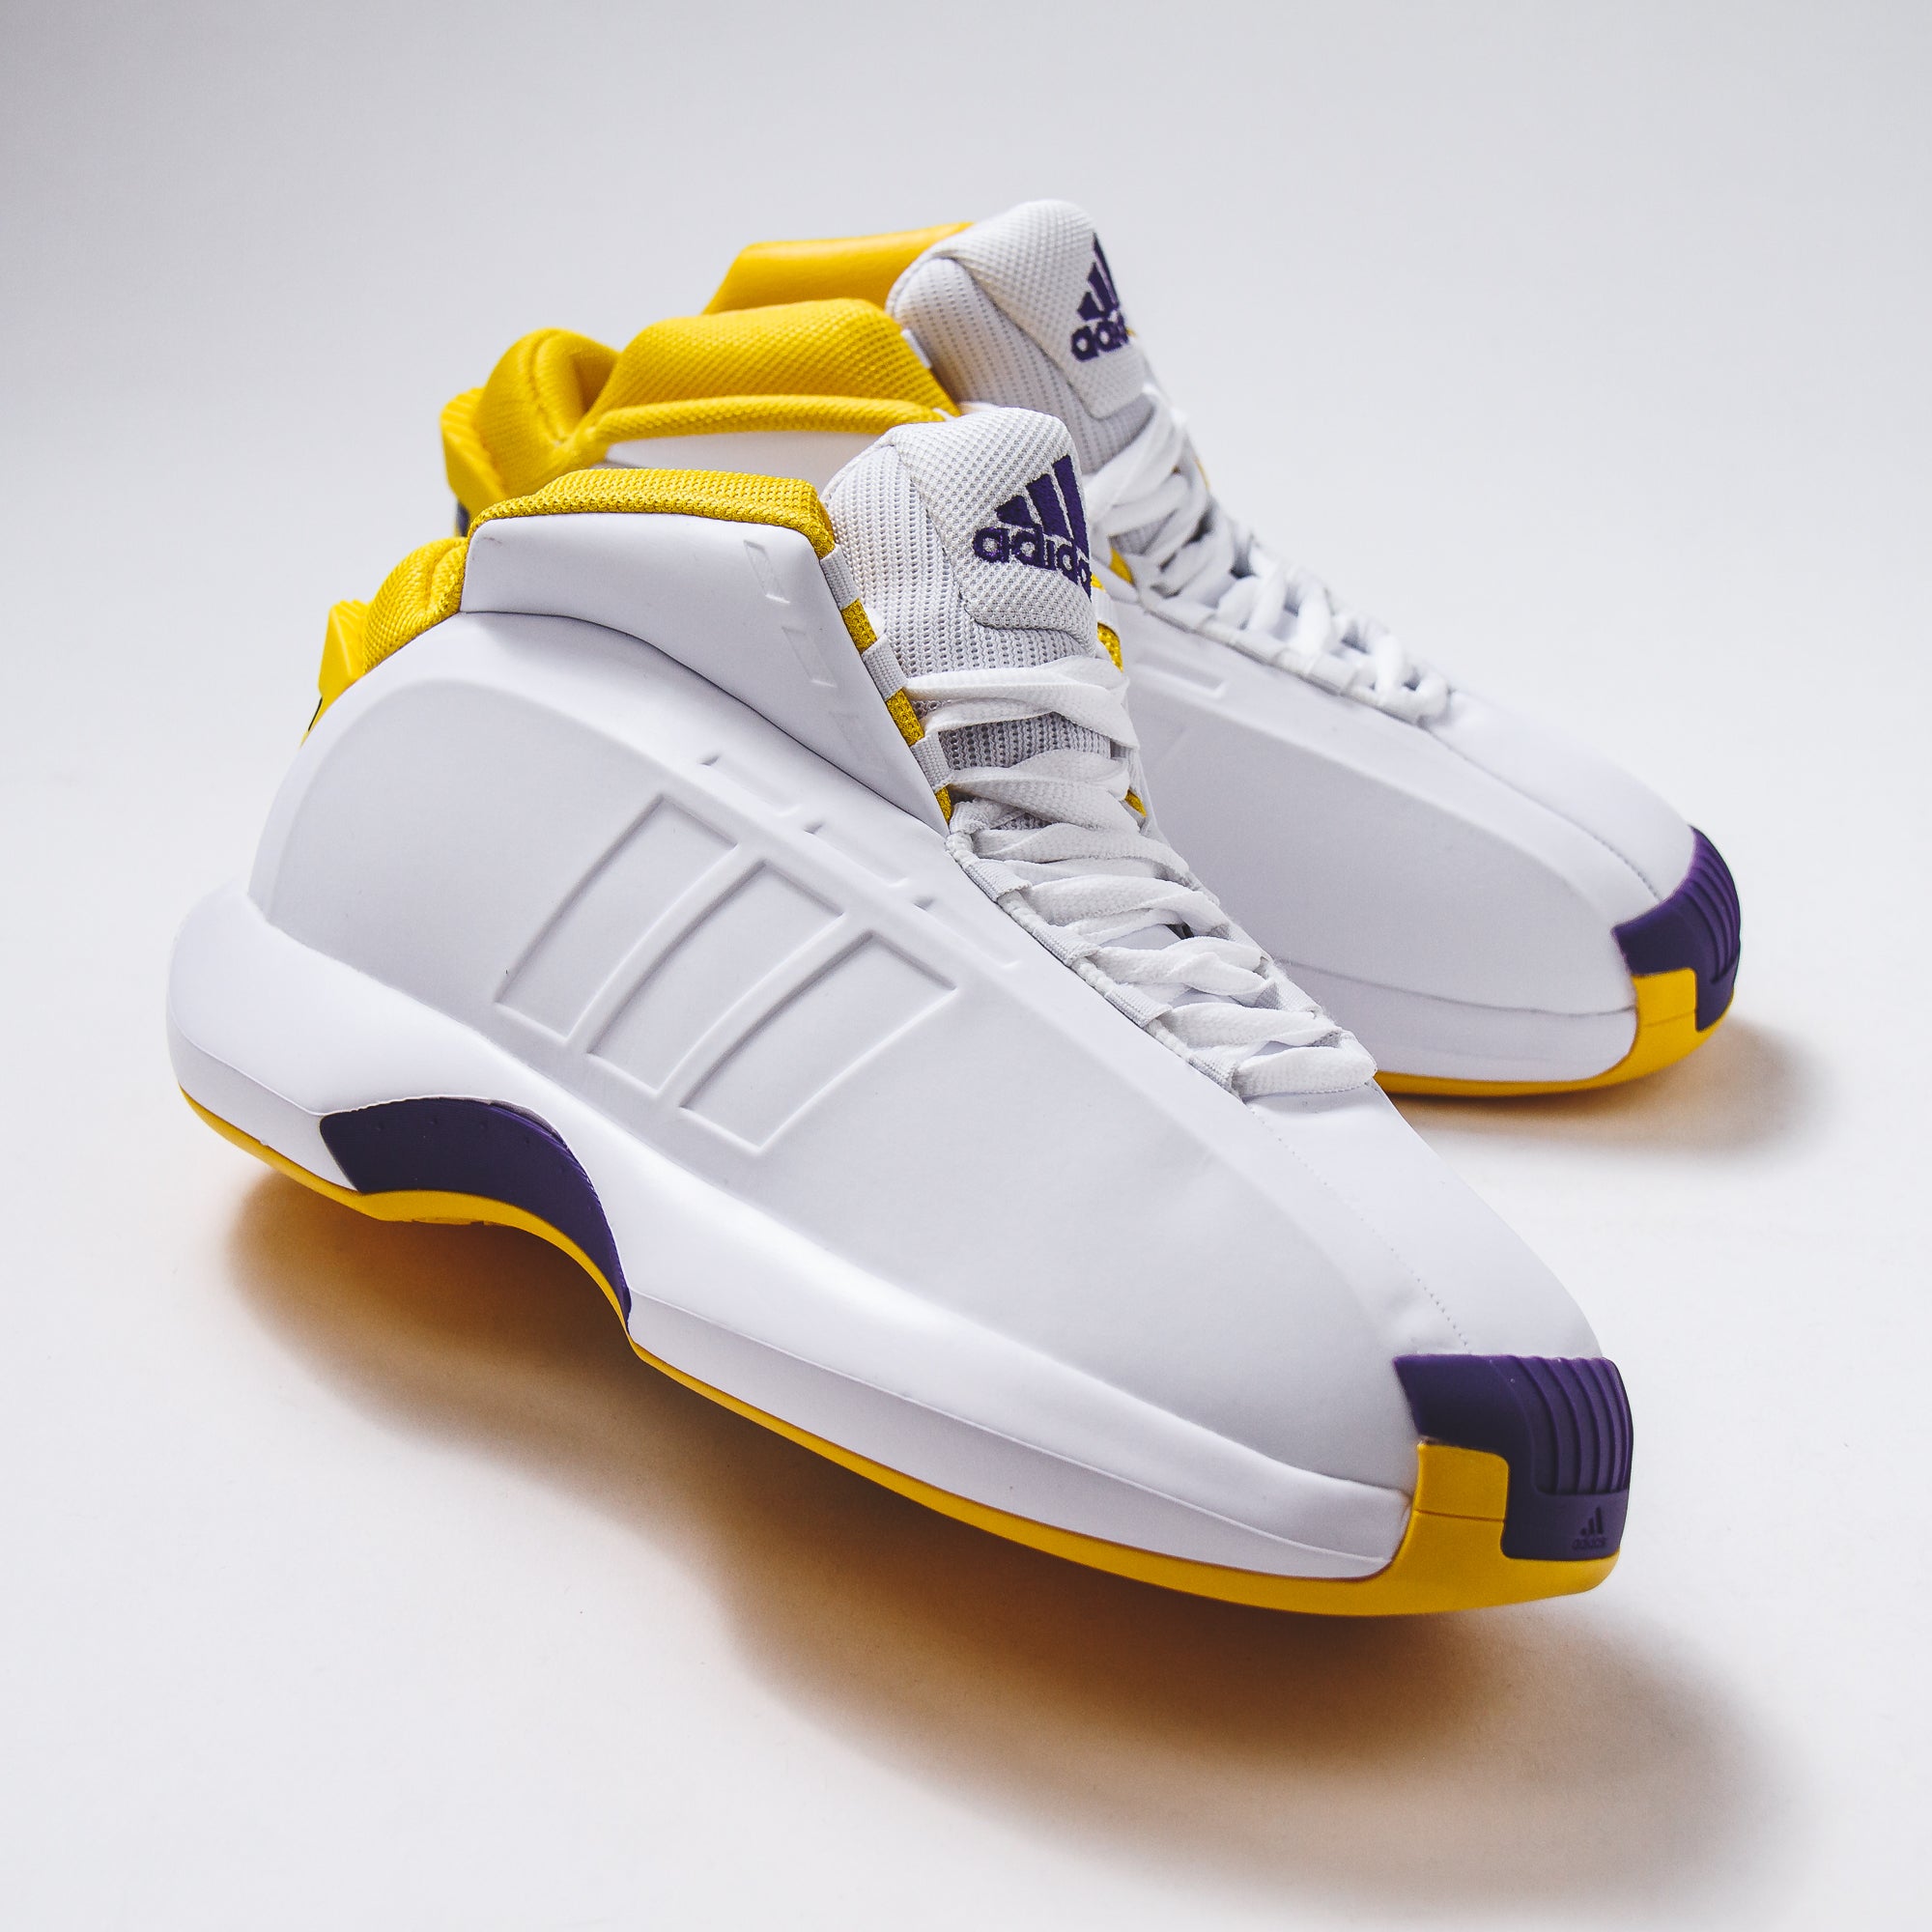 adidas basketball men crazy 1 lakers gy8947 861